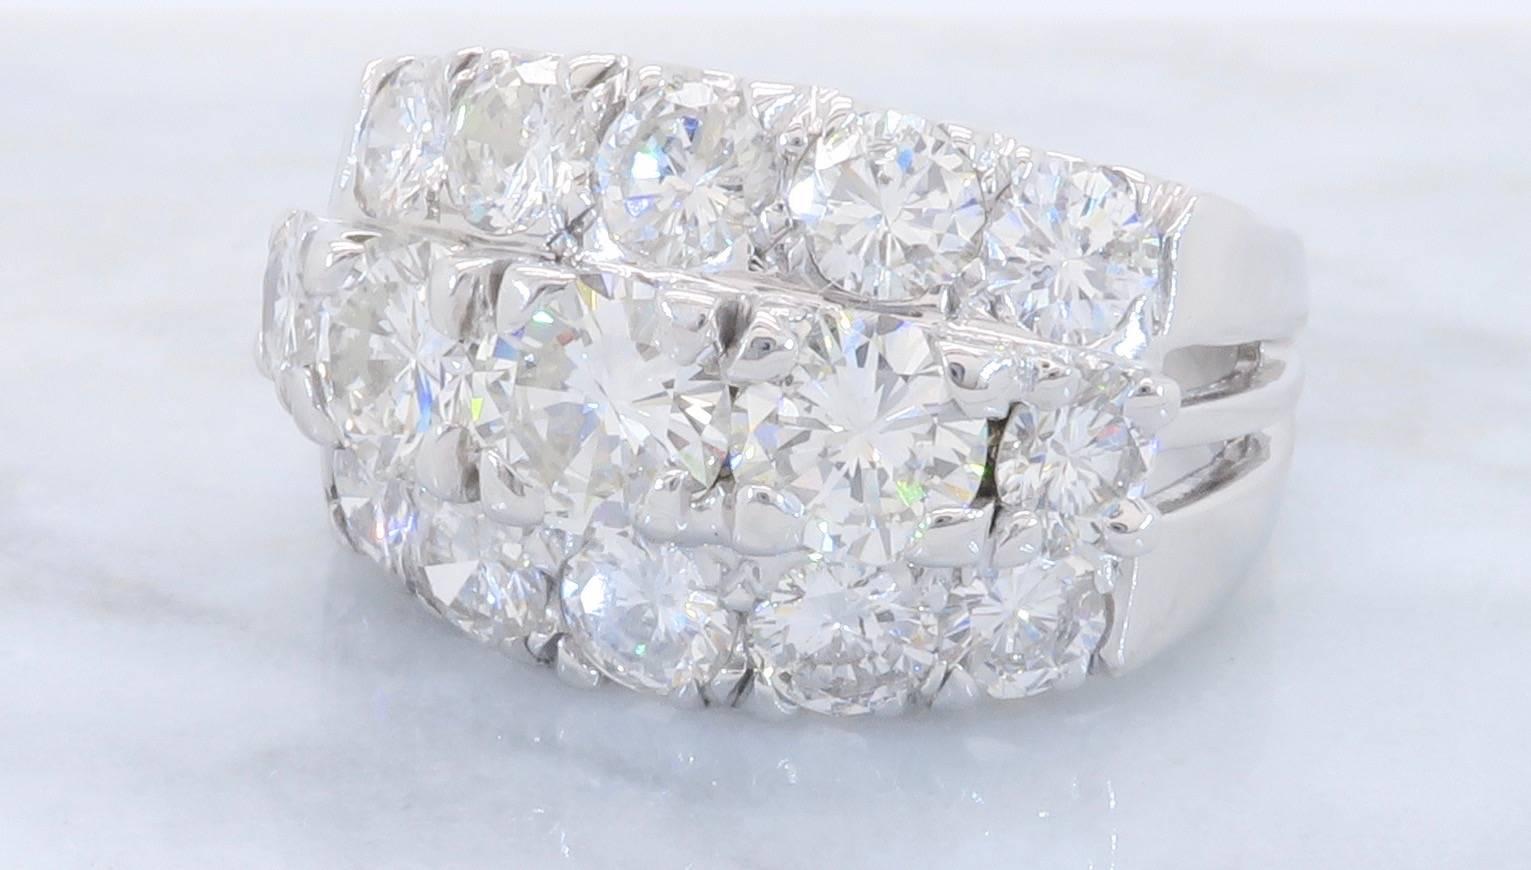 This Glamorous 14K White Gold Diamond Ring features 15 beautiful Round Brilliant Cut Diamonds. The Diamonds are set into three attached rows. The Diamonds have an average color of G-I and have average SI to I clarity. This dazzling ring houses